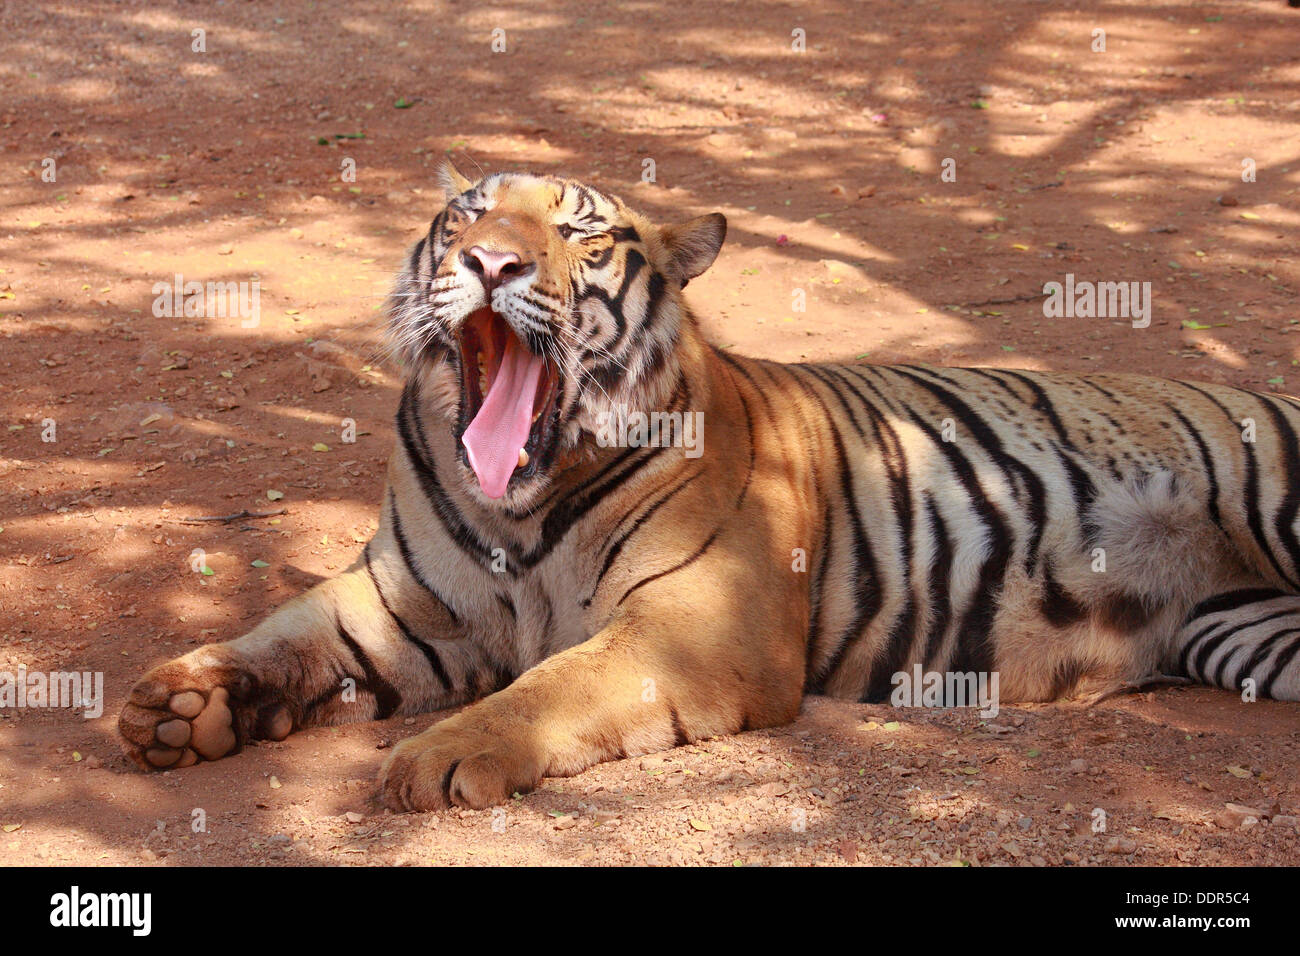 A tiger yawn with lying position Stock Photo